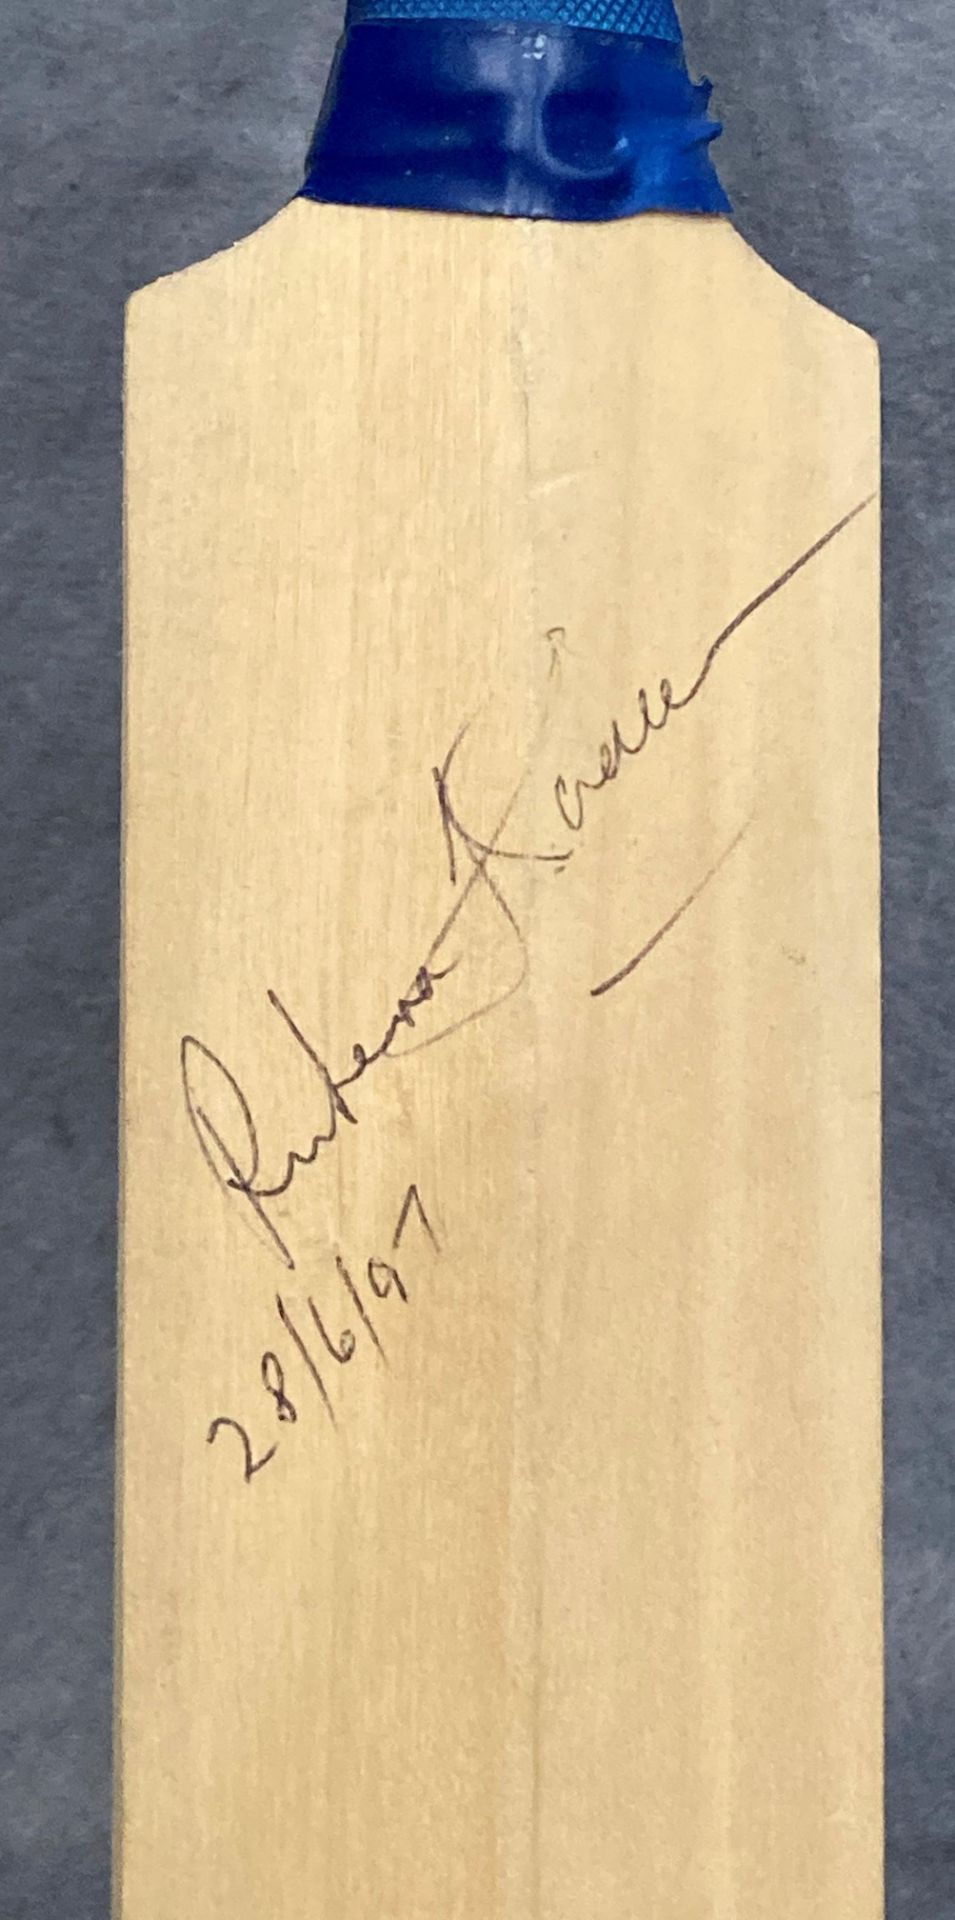 Sir Richard Hadlee signed miniature cricket bat featuring his test career batting and bowling - Image 3 of 3